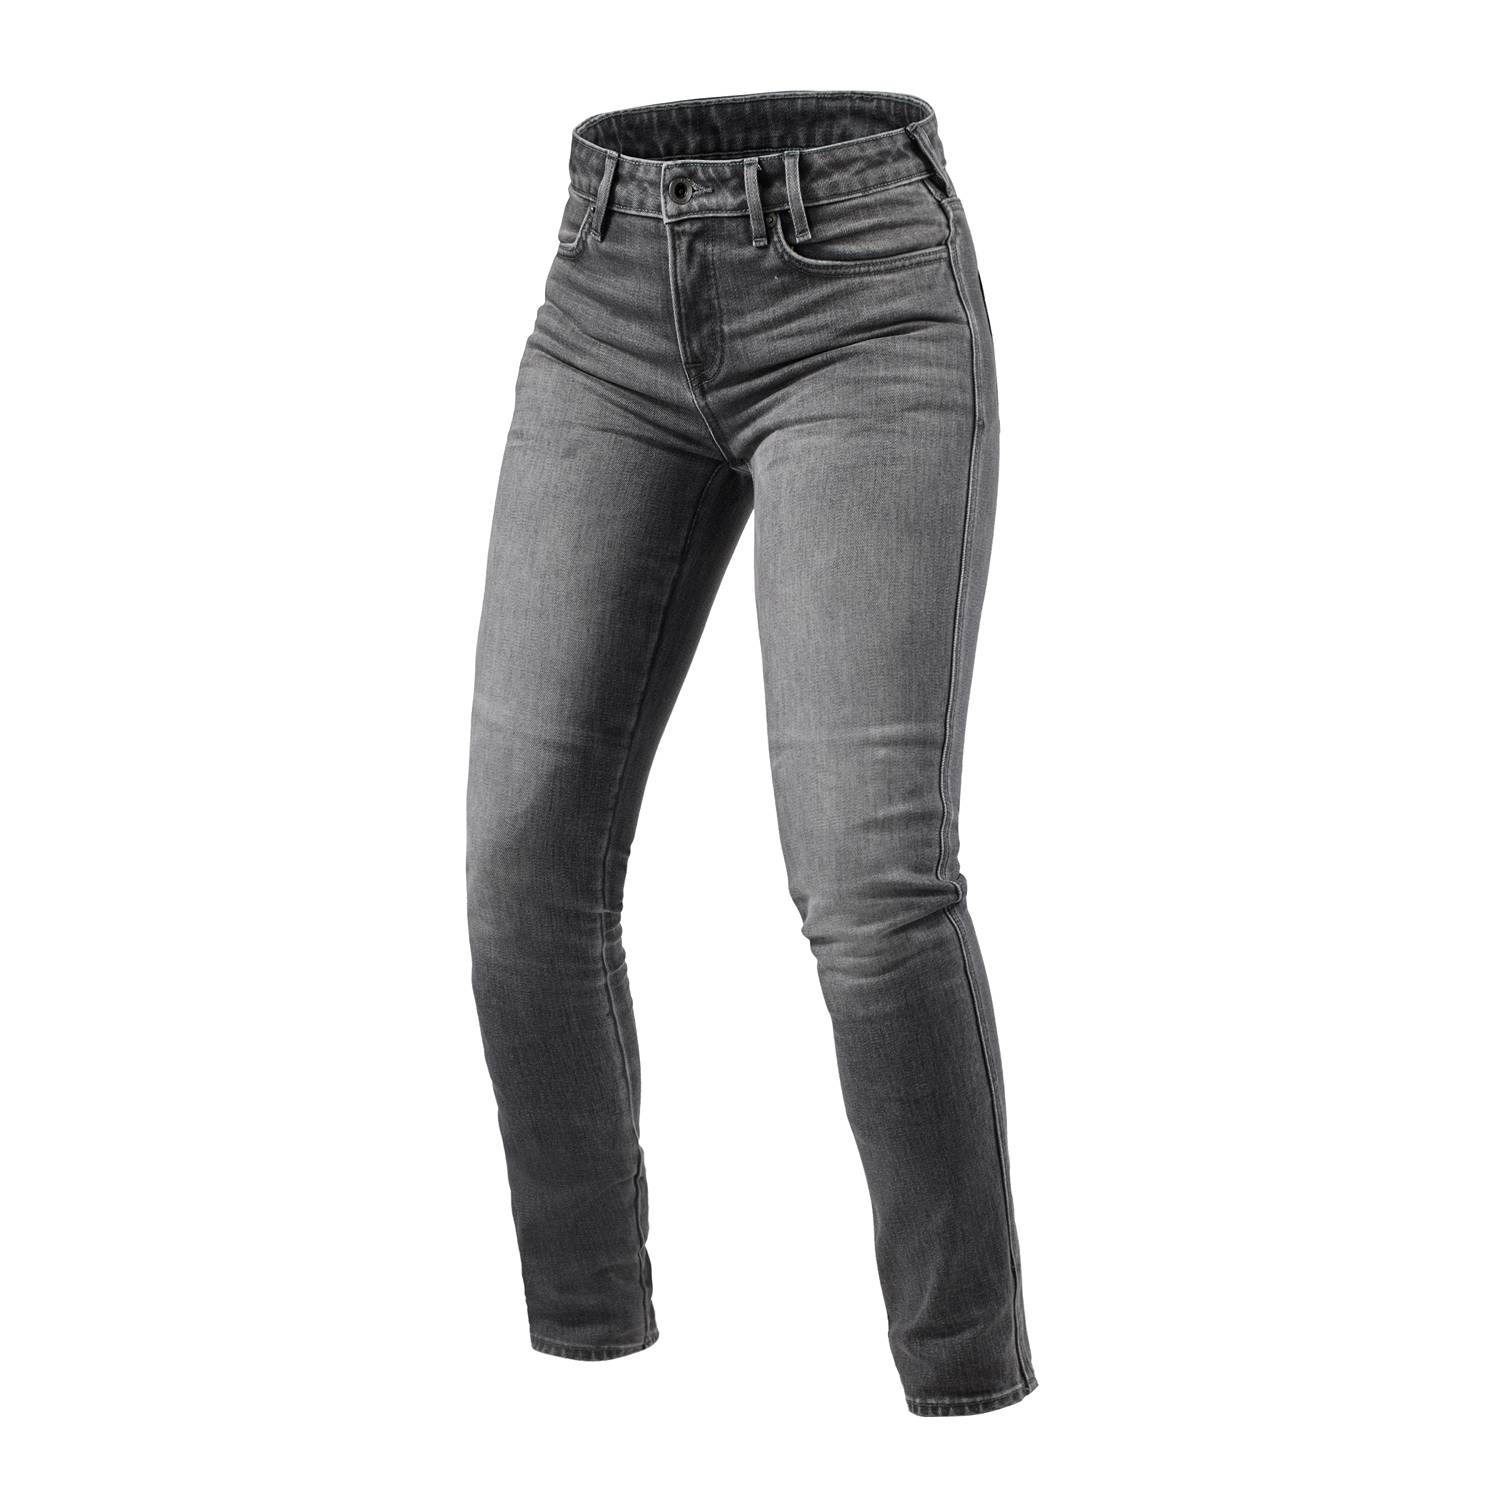 Image of REV'IT! Jeans Shelby 2 Ladies SK Medium Grey Stone L30 Taille L30/W30